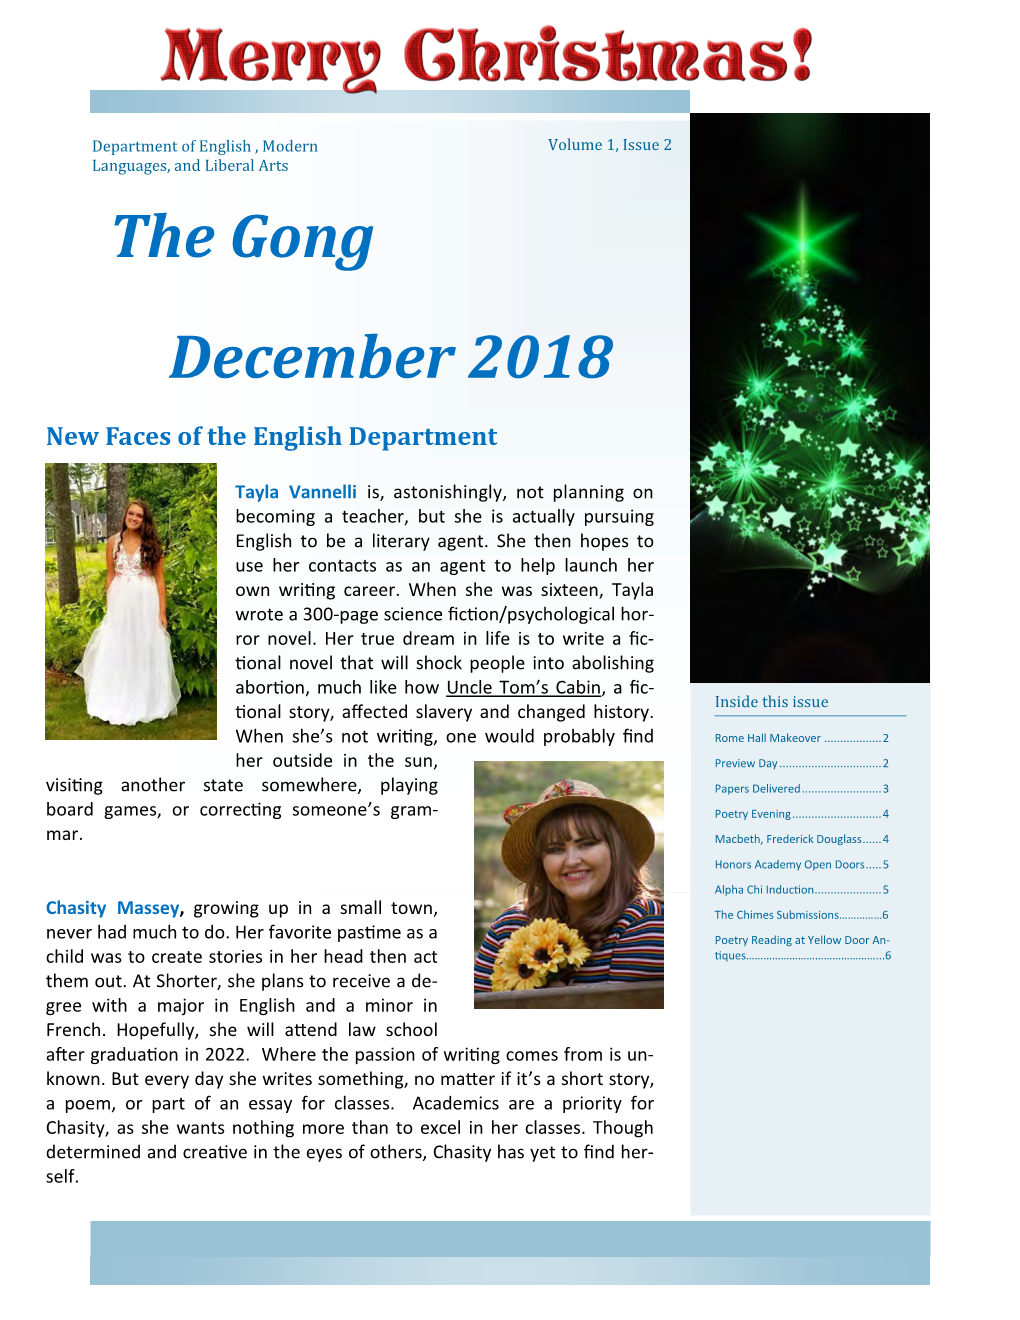 The Gong December 2018